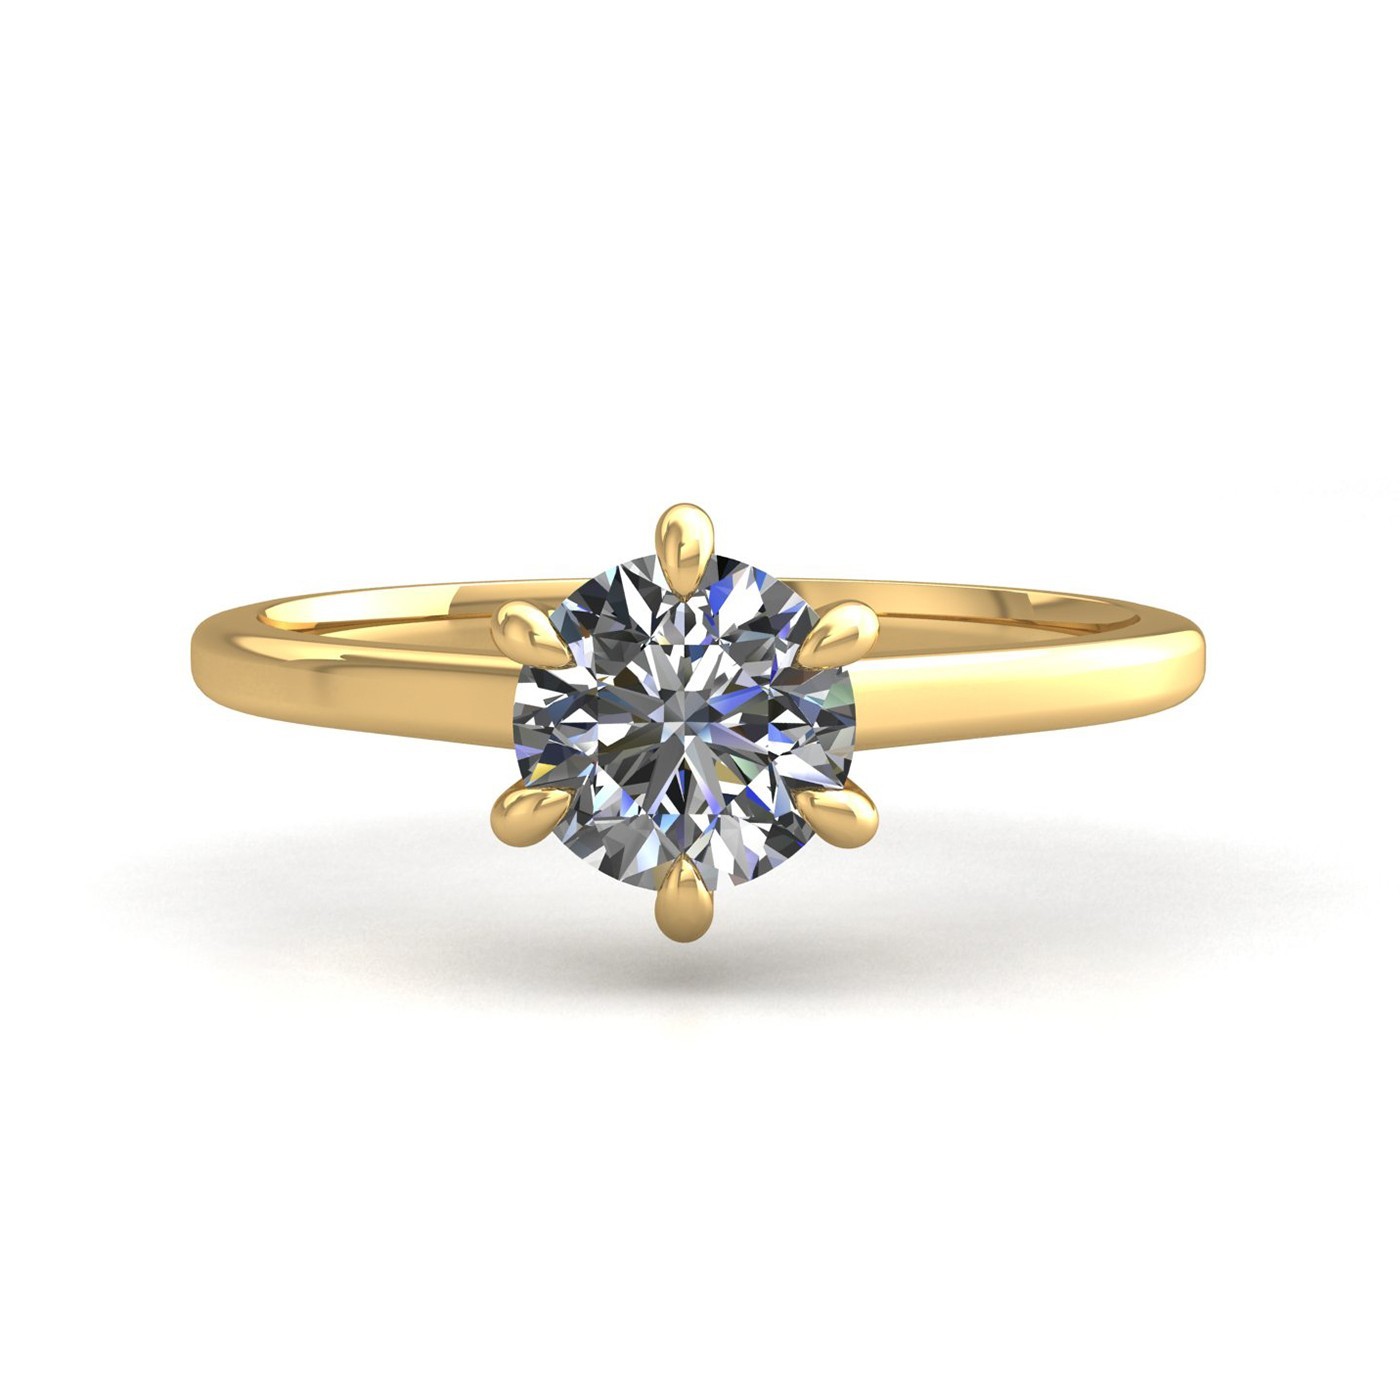 18k yellow gold 0,30 ct 6 prongs solitaire round cut diamond engagement ring with whisper thin band Photos & images